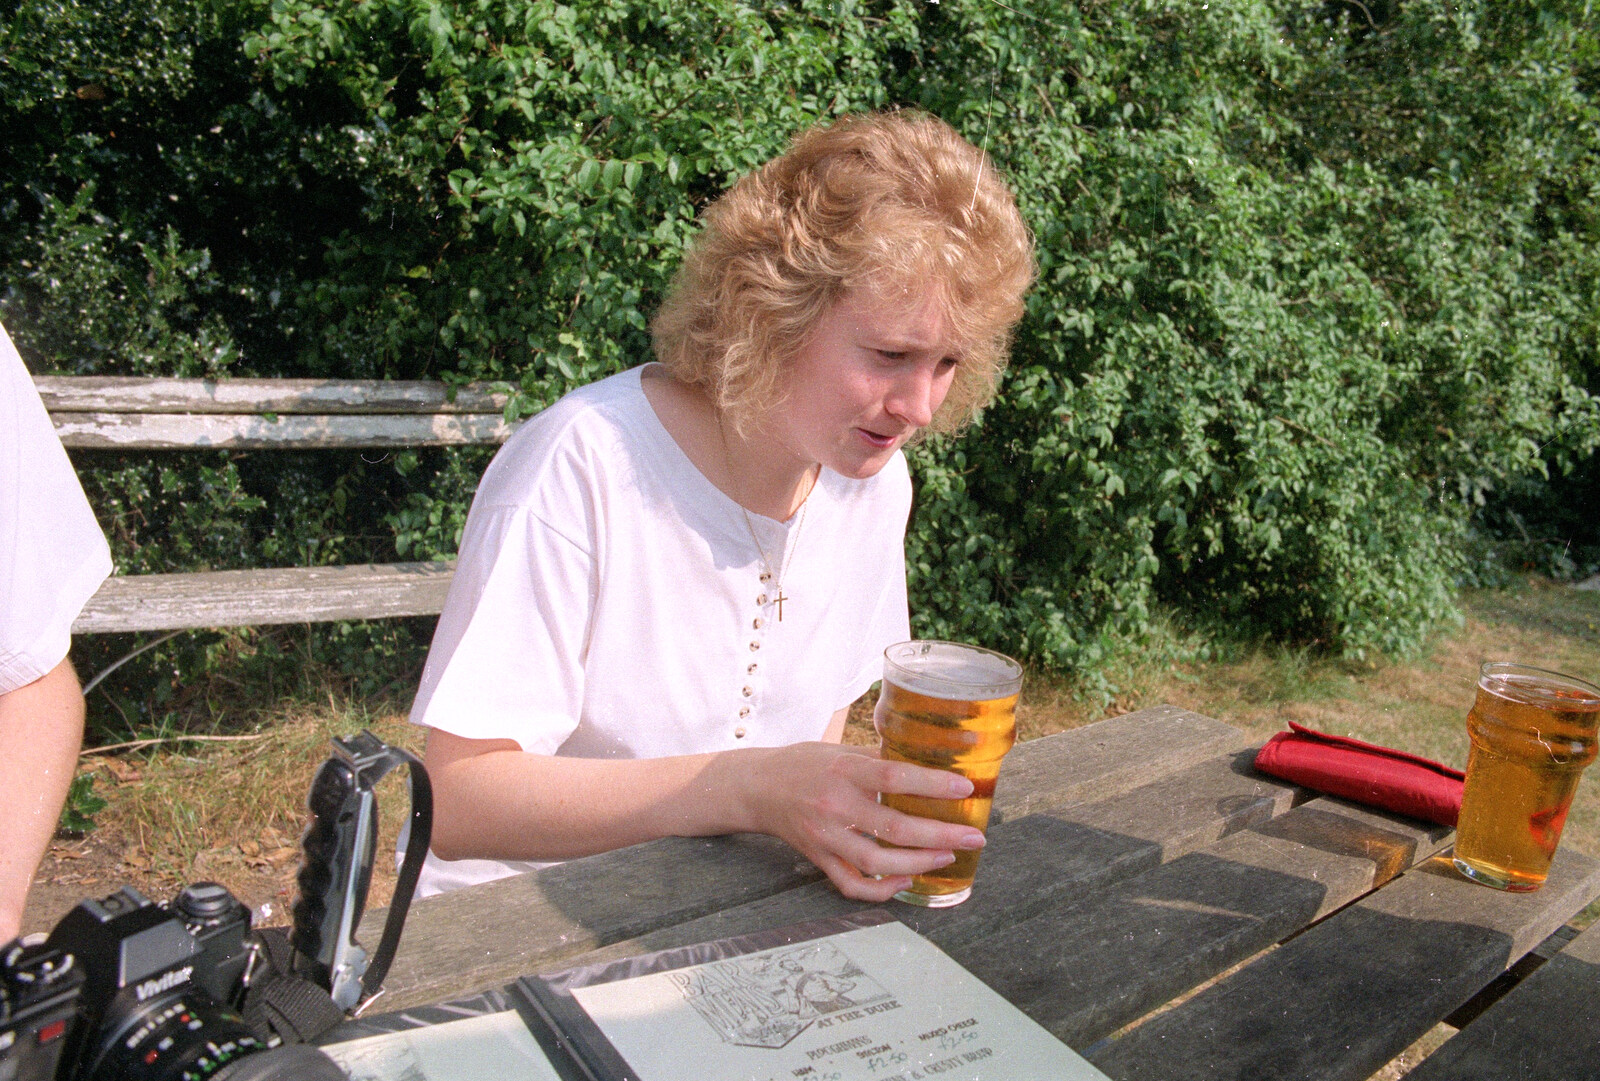 Maria looks taken aback by her lager from Printec at Thwaite Buck's Head, and a Trip to Farnborough, Suffolk and Hampshire - 19th August 1991